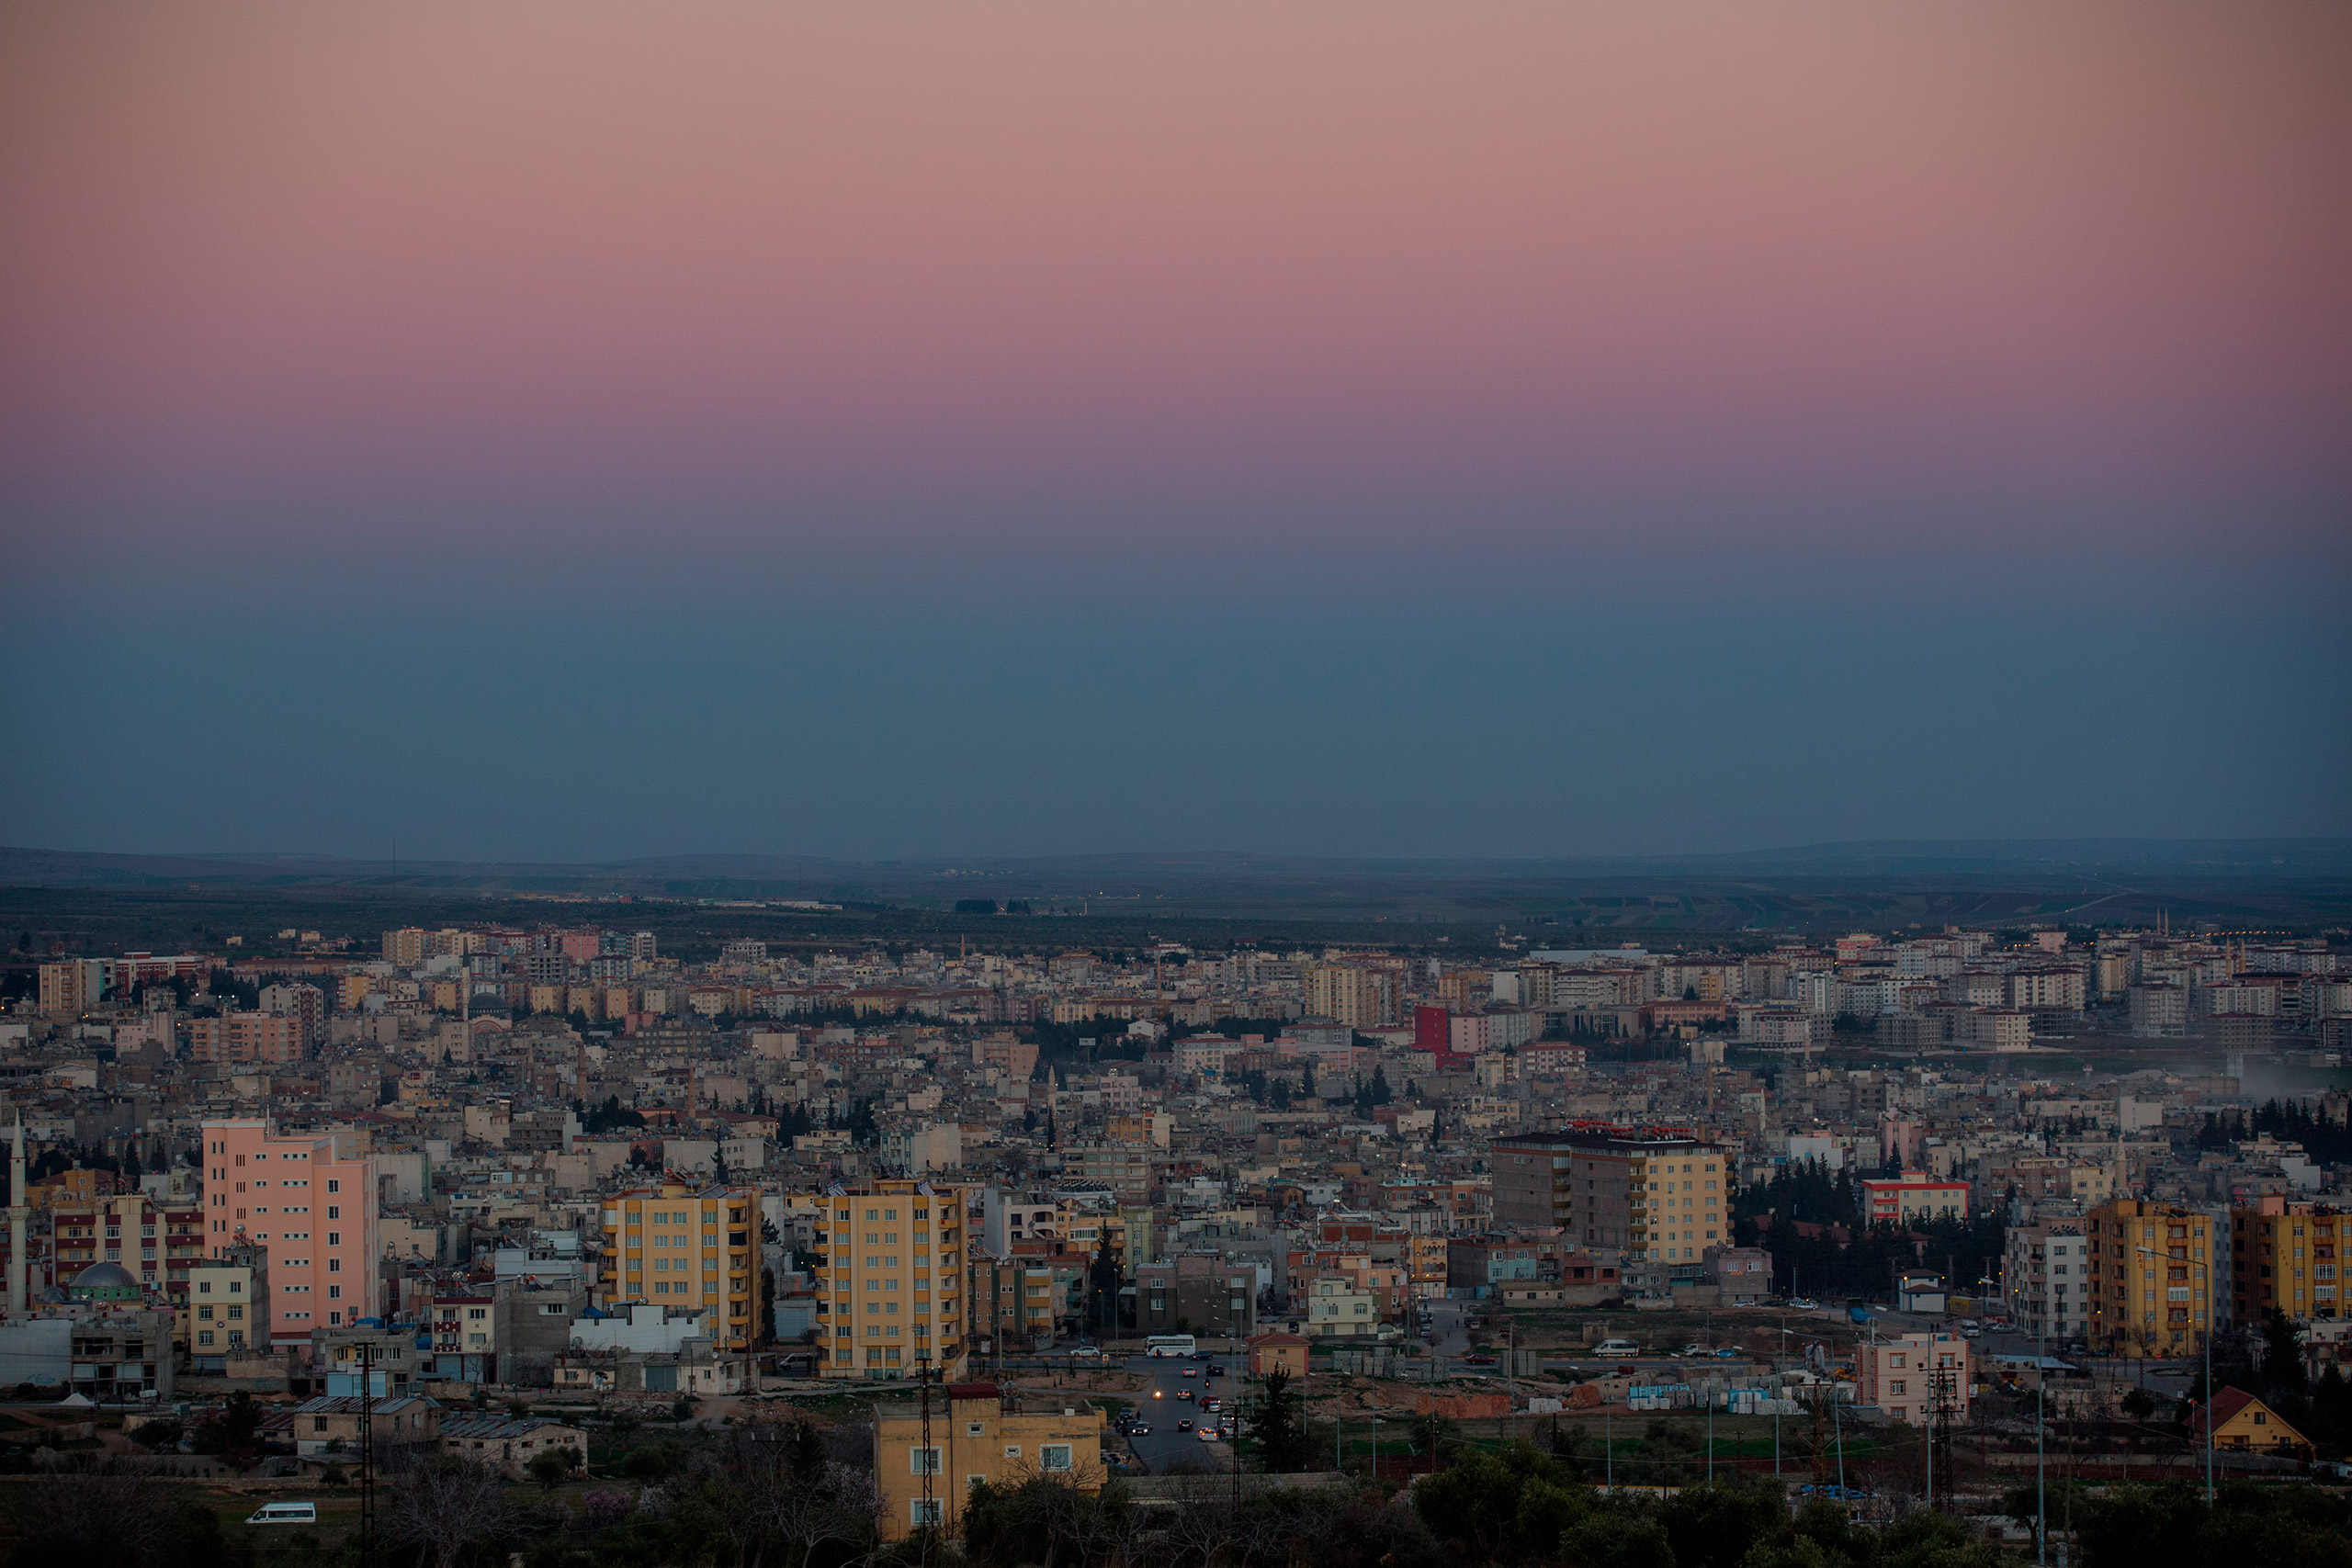 The sun sets on the city of Kilis, which lies along Turkey's southern border with Syria and includes the Oncupinar Crossing, March 1, 2016. (Chris McGrath—Getty Images)